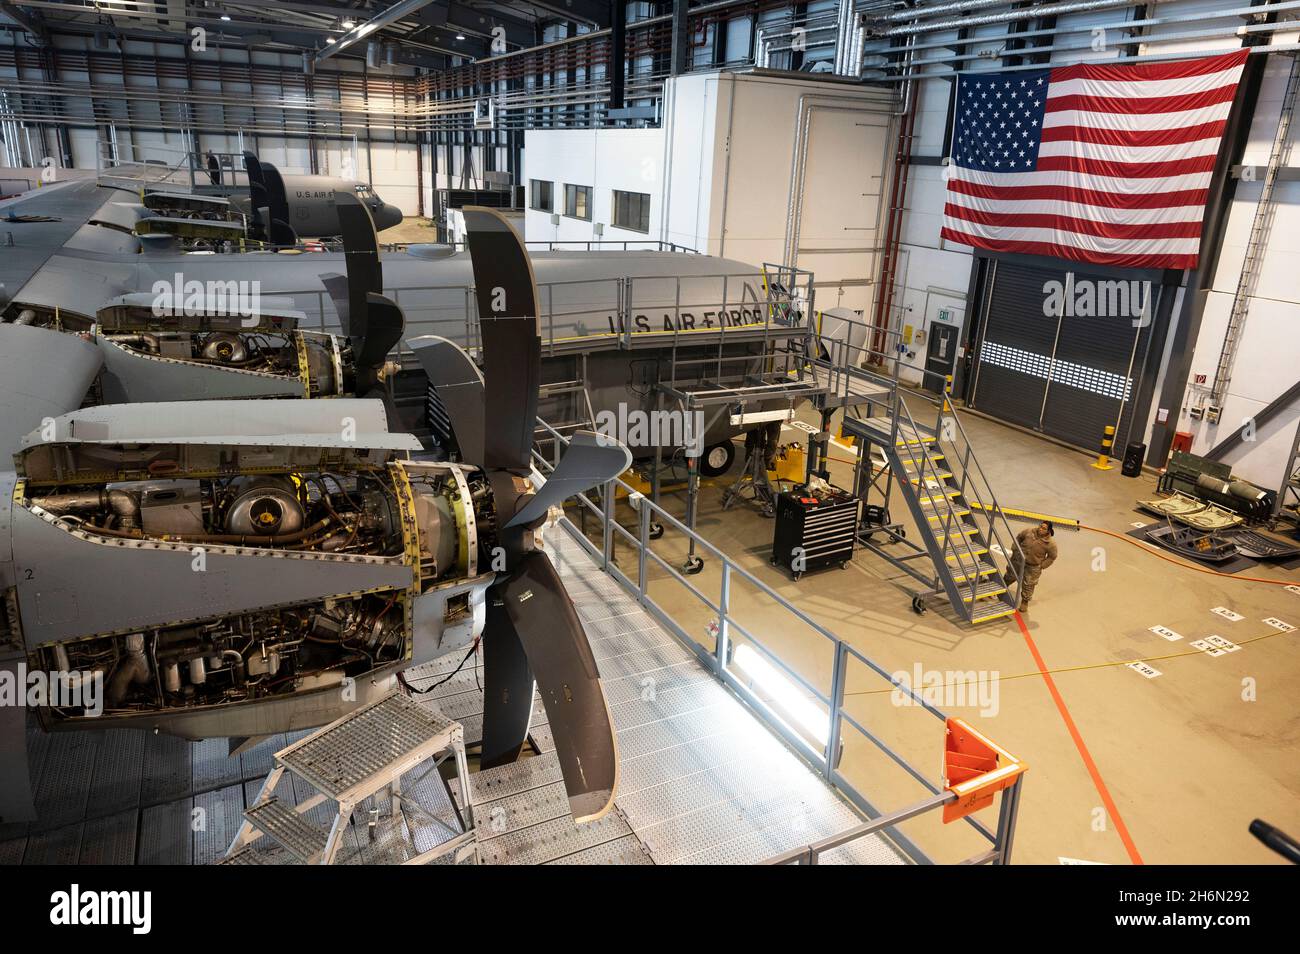 A C-130J Super Hercules aircraft undergoes maintenance at Ramstein Air Base, Germany, Nov. 15, 2021. There are 14 C-130J Super Hercules aircraft assigned to the 86th Airlift Wing. The 86th Maintenance Group is responsible for ensuring they can be in the air at a moment’s notice. (U.S. Air Force photo by Senior Airman Thomas Karol) Stock Photo